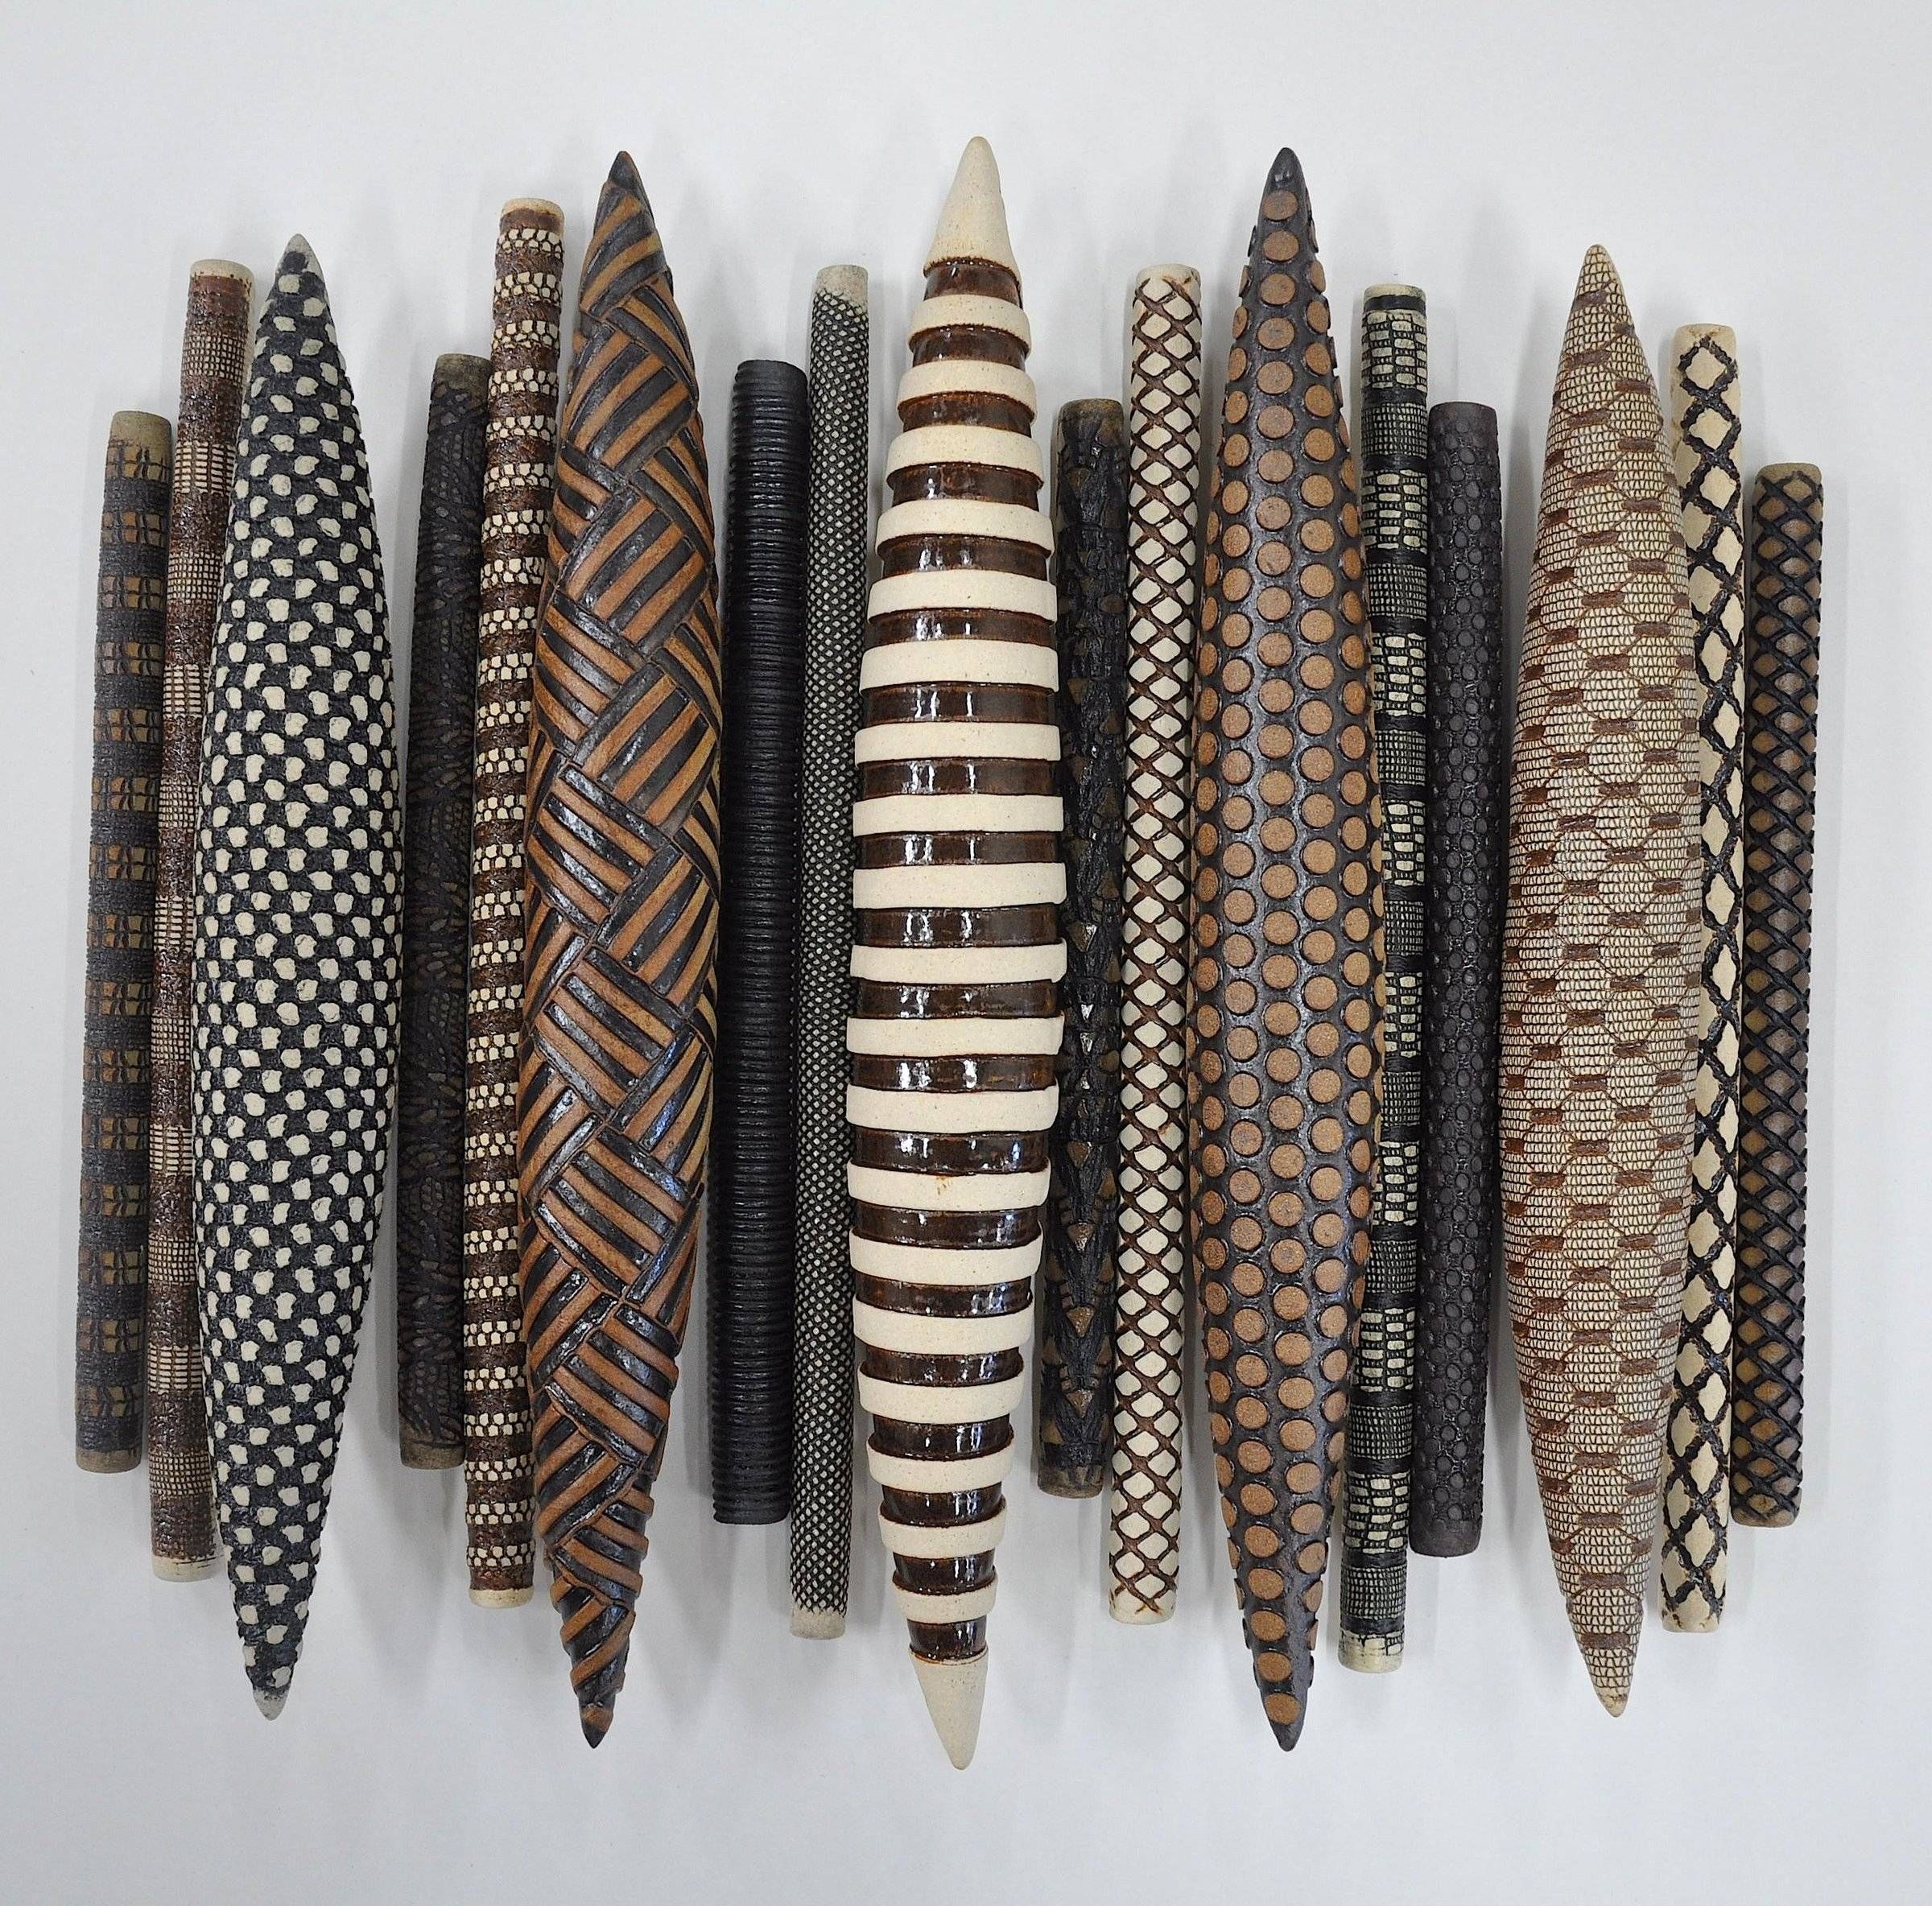 Domestic Markings 17kelly Jean Ohl (ceramic Wall Sculpture Throughout Most Up To Date Large Ceramic Wall Art (View 1 of 25)